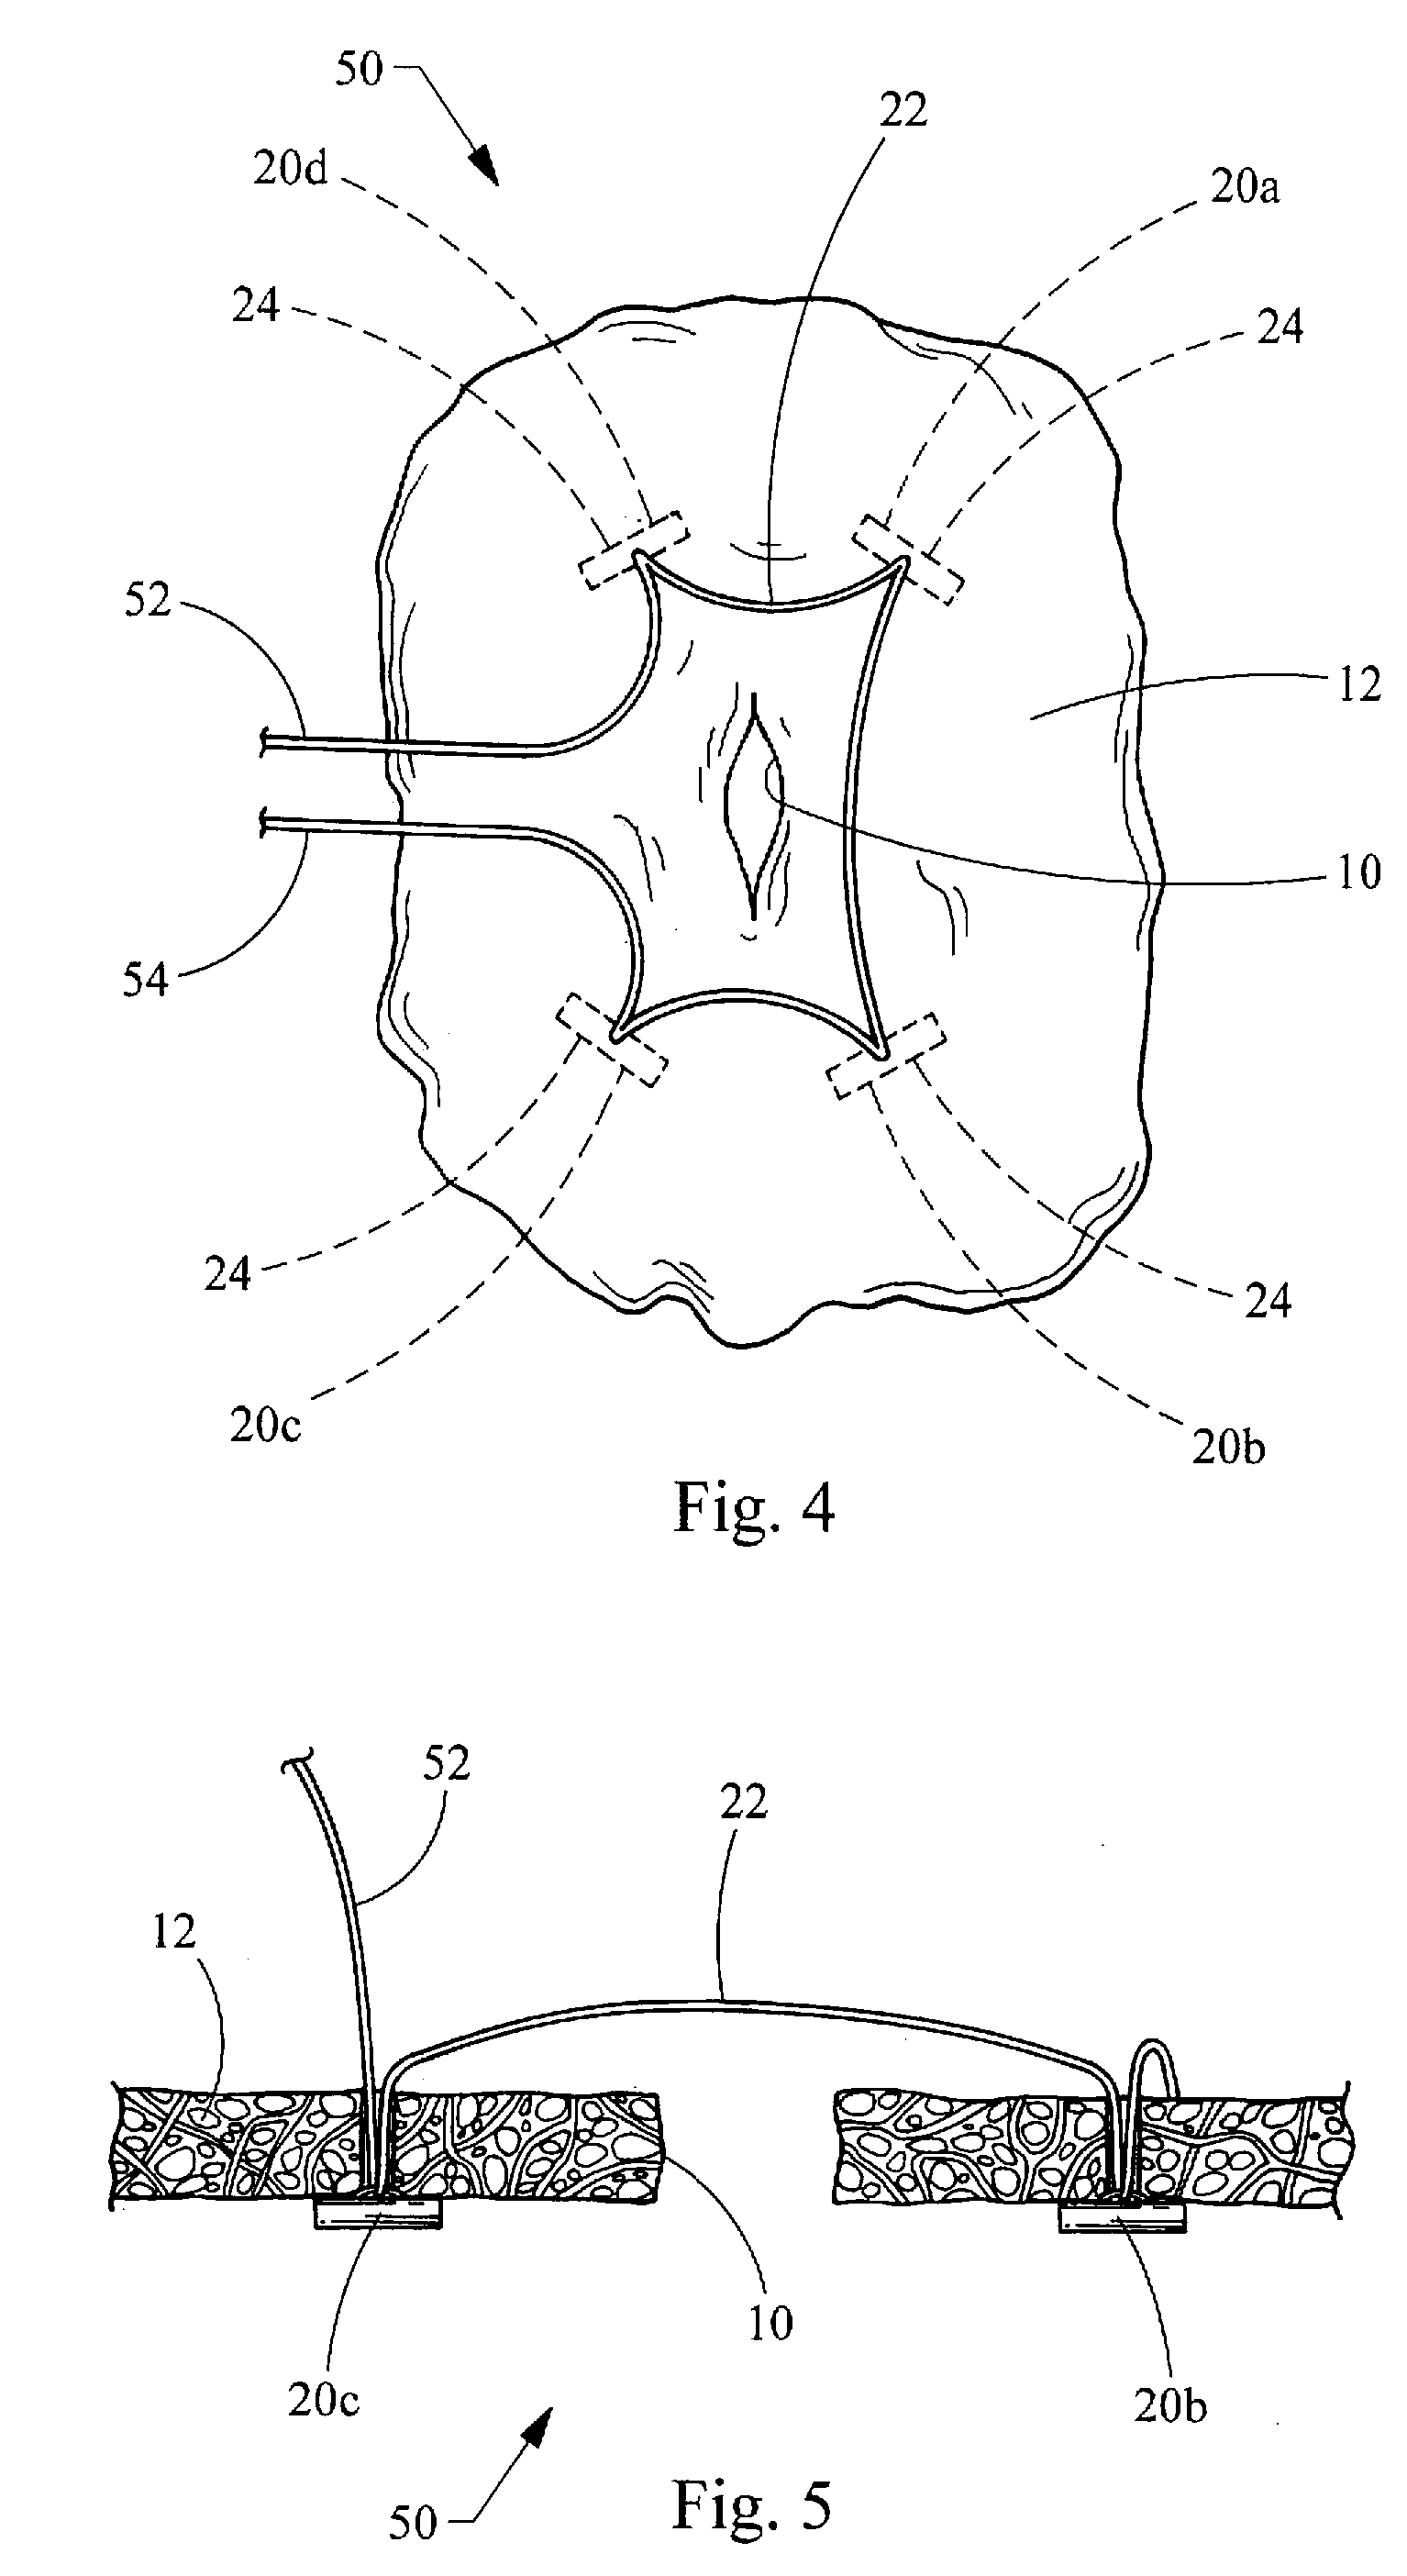 Visceral Anchors For Purse-String Closure of Perforations